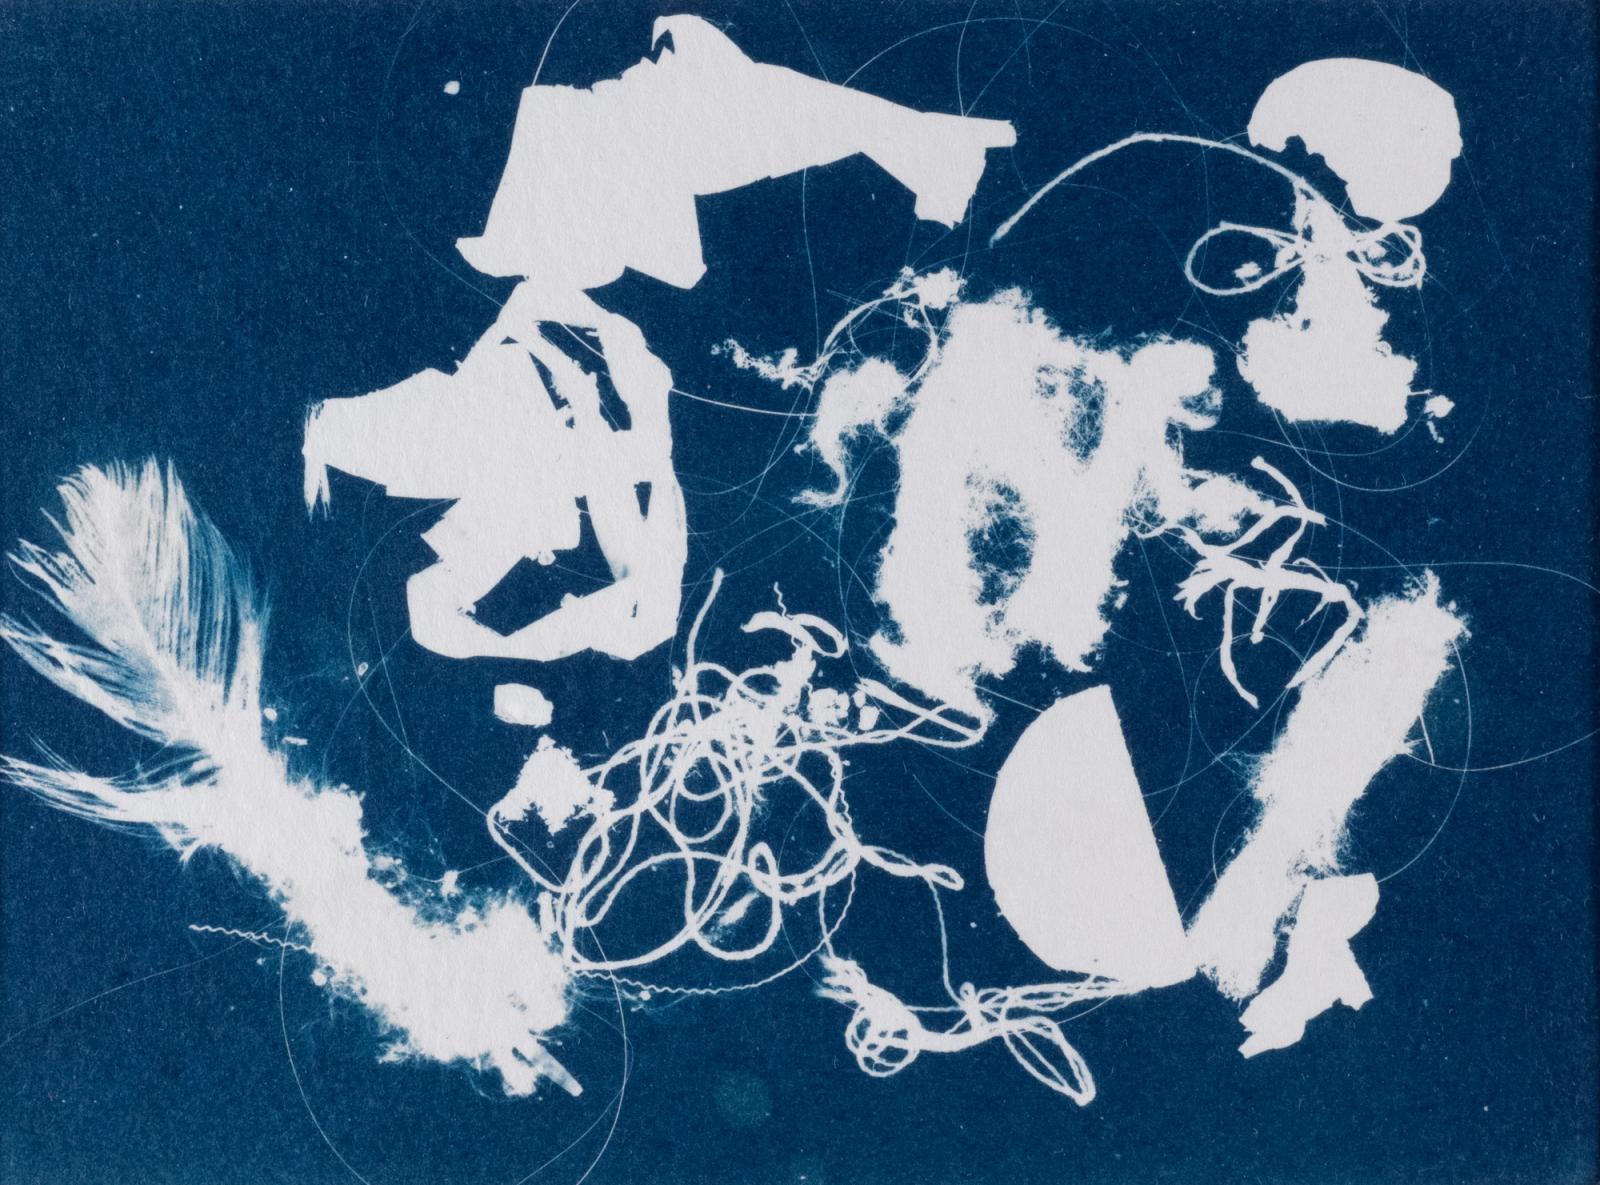 Artifact series: Versailles, France, 6/16. The  Artifact series is a collection of photogram images utilizing small litter found at various tourist locations. Cyanotype photograph.